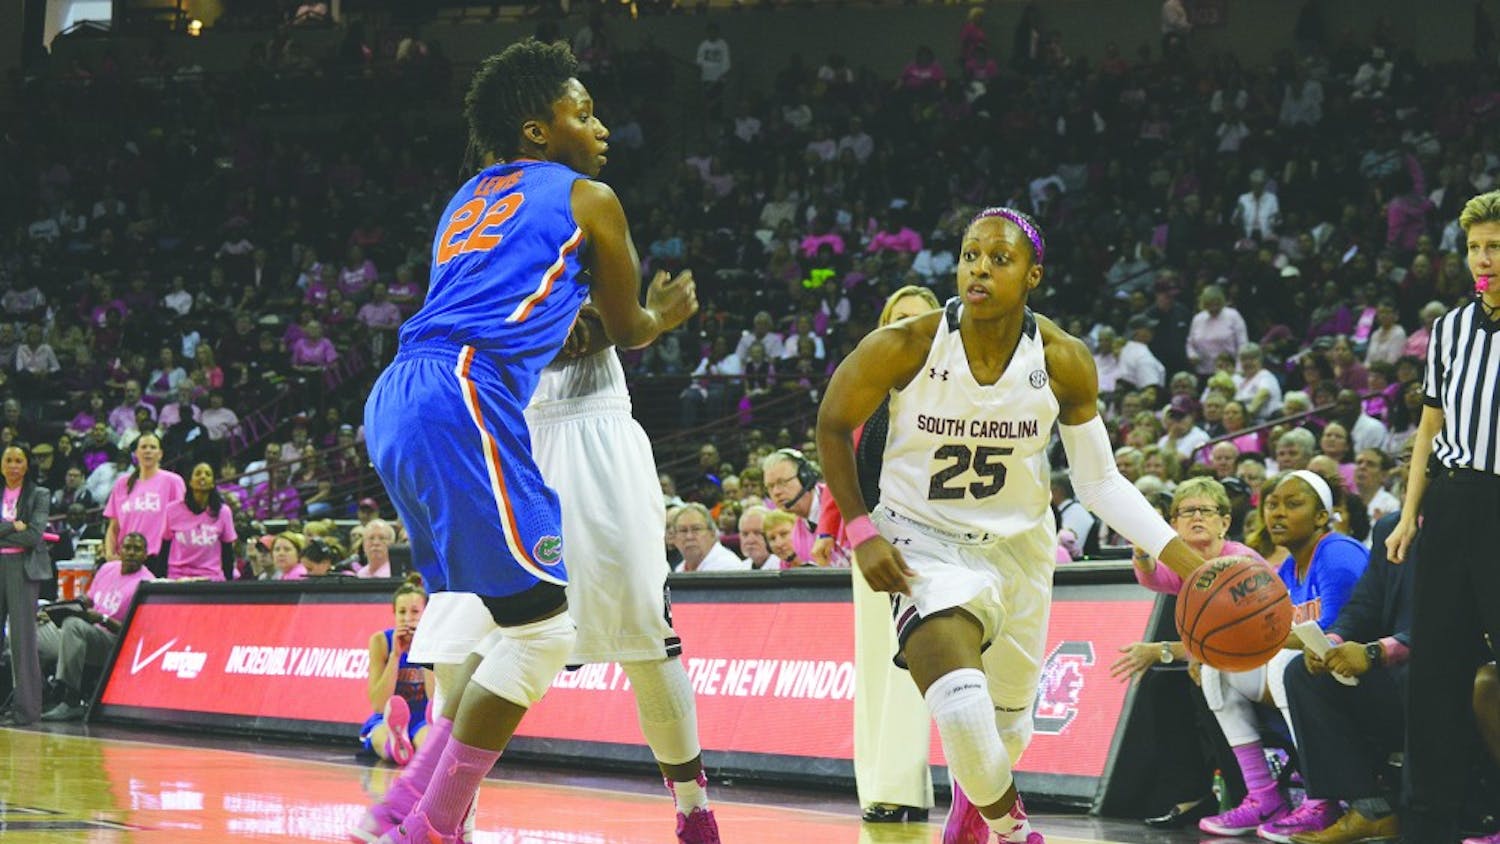 	Sophomore guard Tiffany Mitchell scored a team-high 20 points in the Sunday’s win over the Gators. She leads the Gamecocks in scoring, averaging 15.3 points per game.